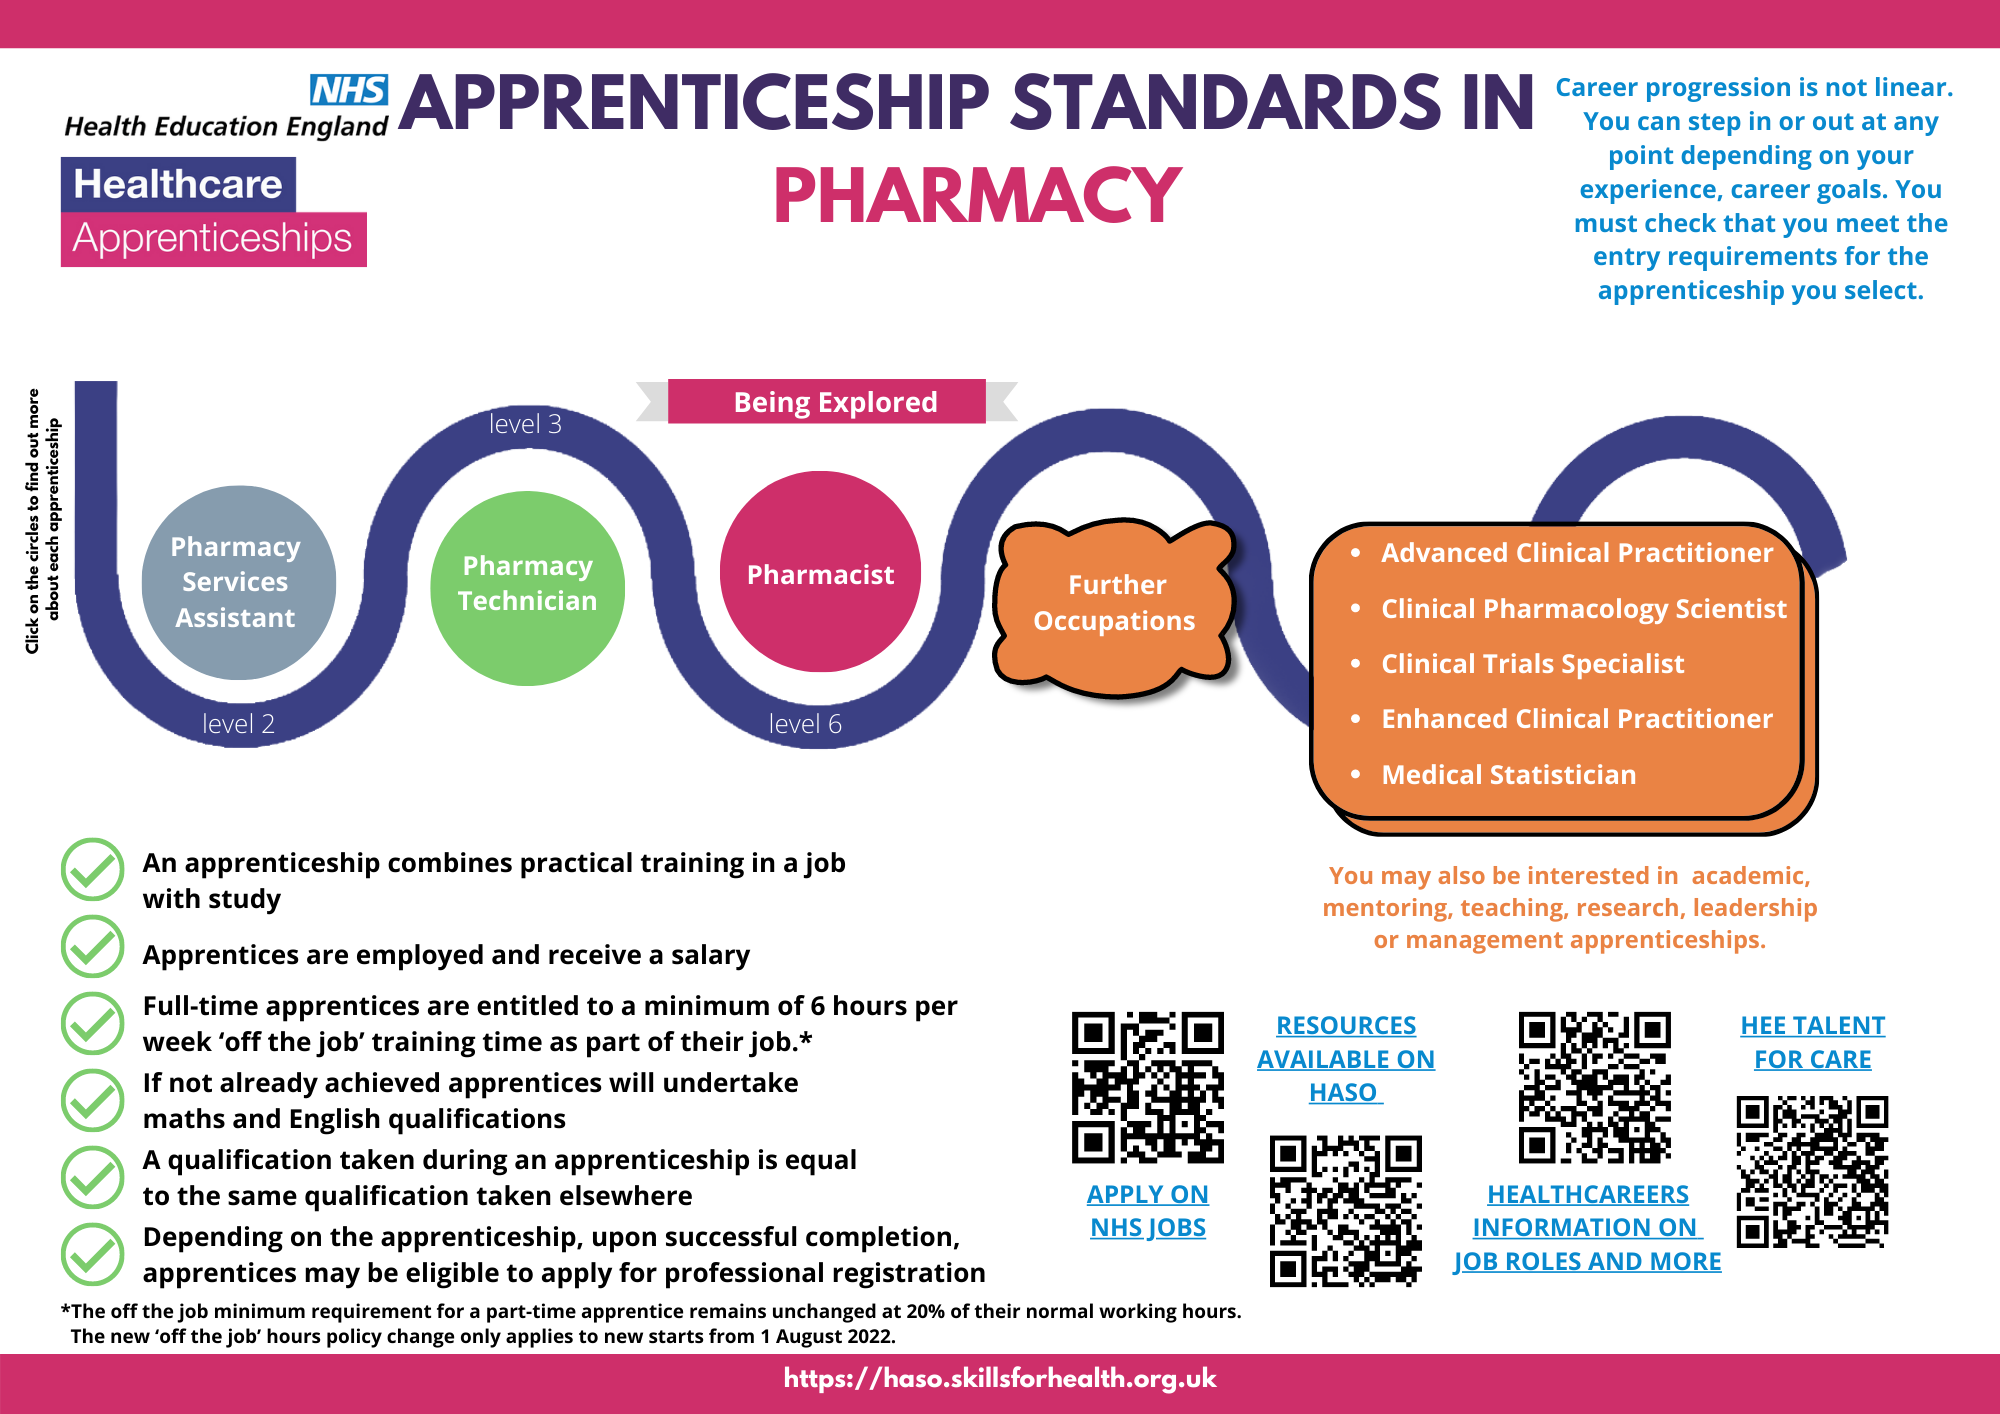 Pharmacy apprenticeship standards factsheet which shows relevant apprenticeships. The Pharmacy page also lists this information: https://haso.skillsforhealth.org.uk/pharmacy/